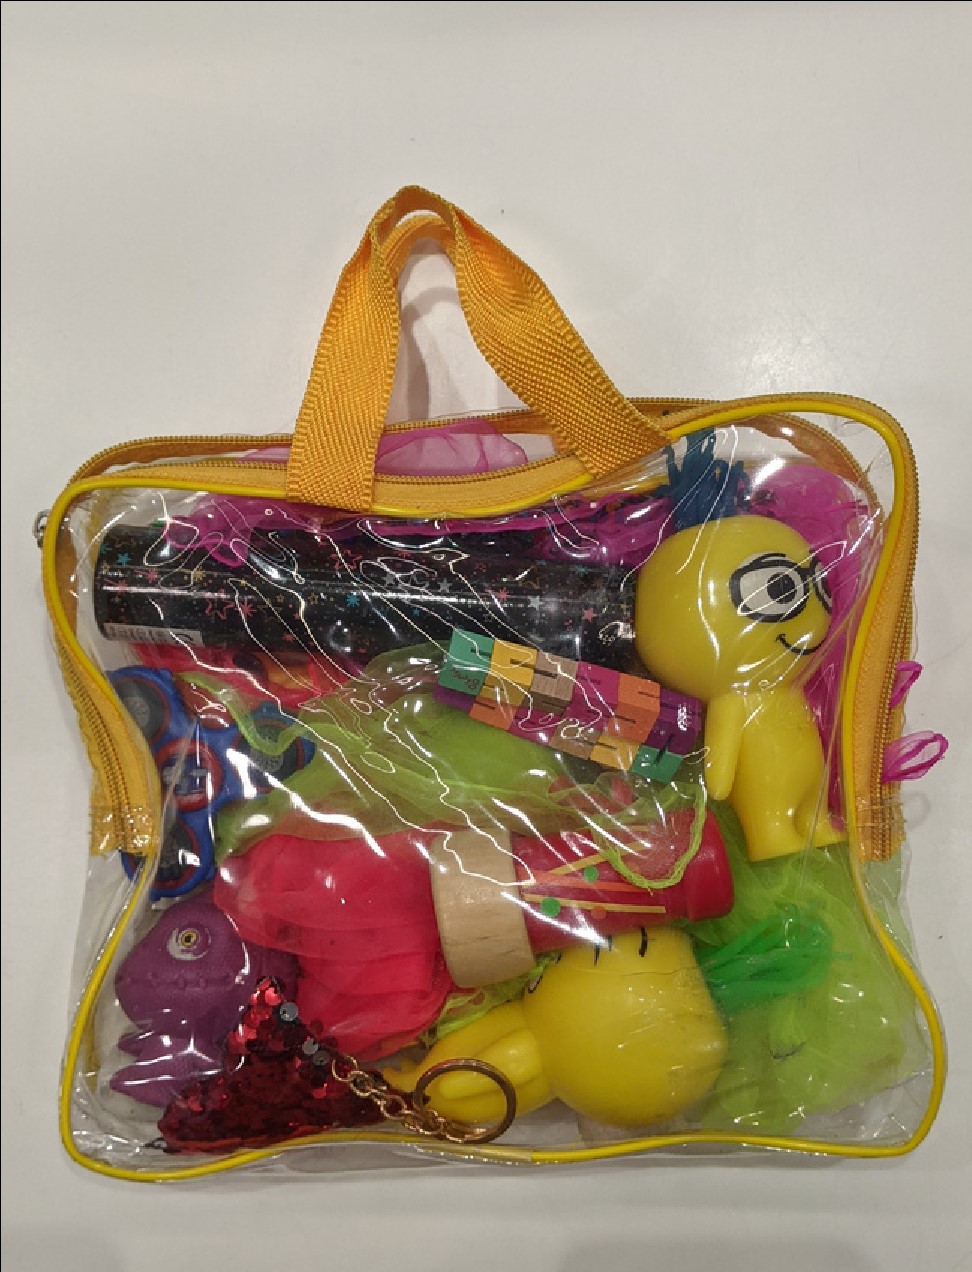 Sensory bag available at People's History Museum.